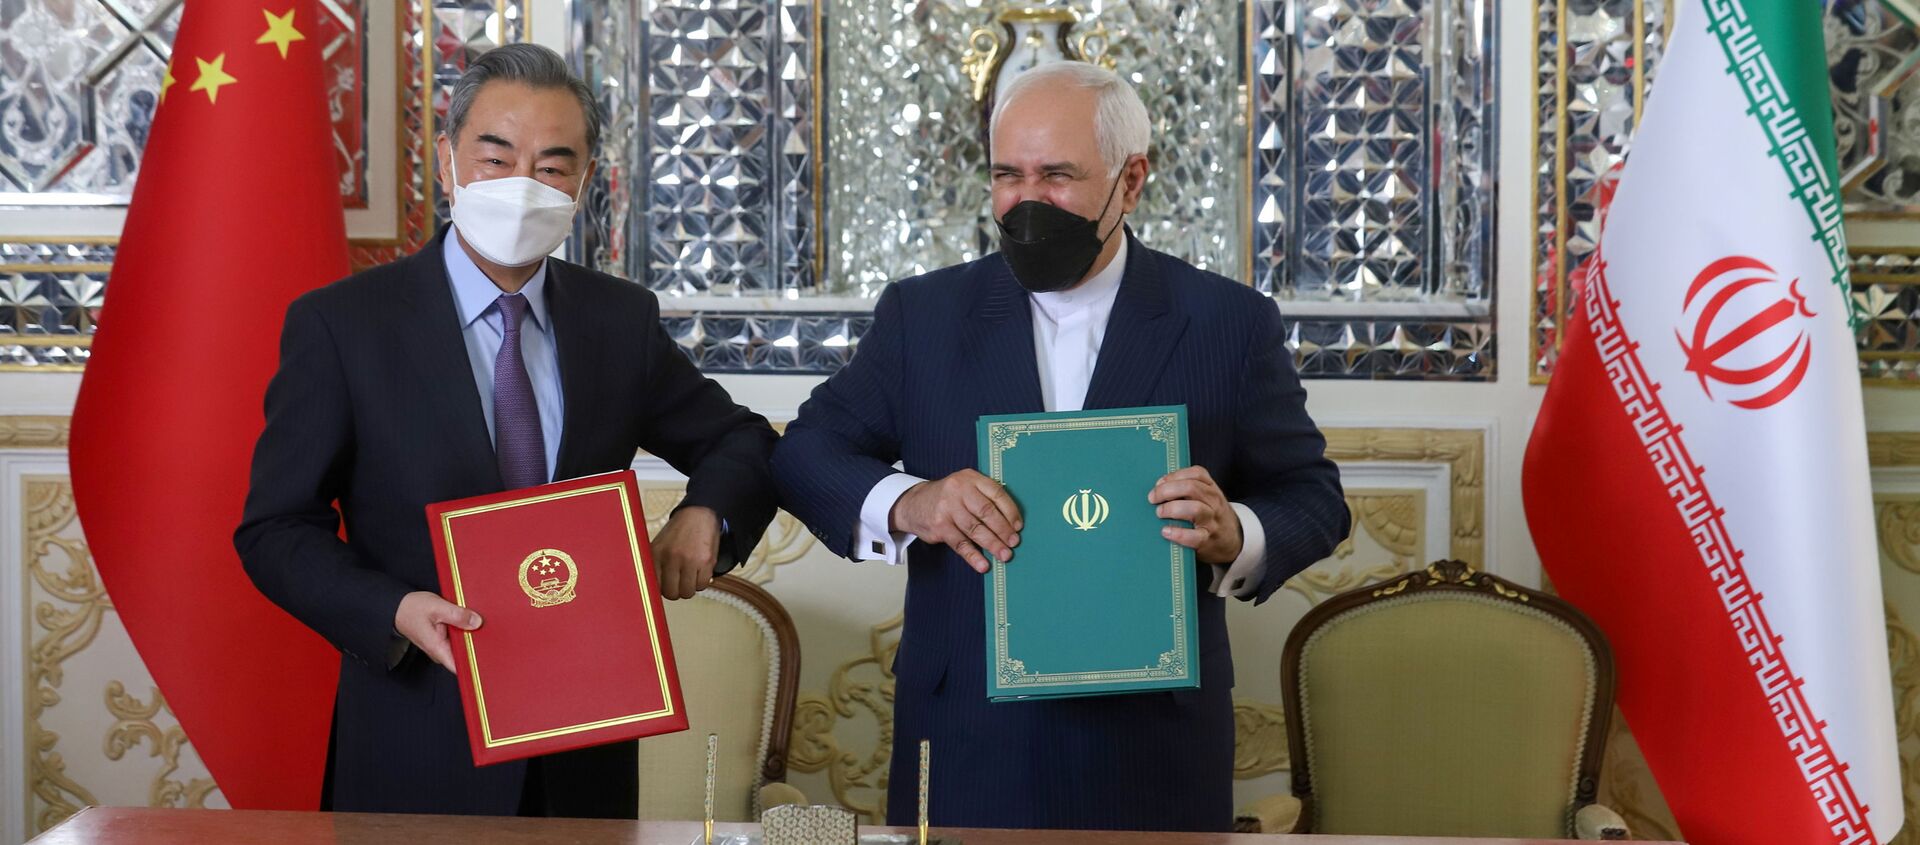 Iran's Foreign Minister Mohammad Javad Zarif and China's Foreign Minister Wang Yi bump elbows during the signing ceremony of a 25-year cooperation agreement, in Tehran, Iran March 27, 2021 - Sputnik International, 1920, 01.04.2021